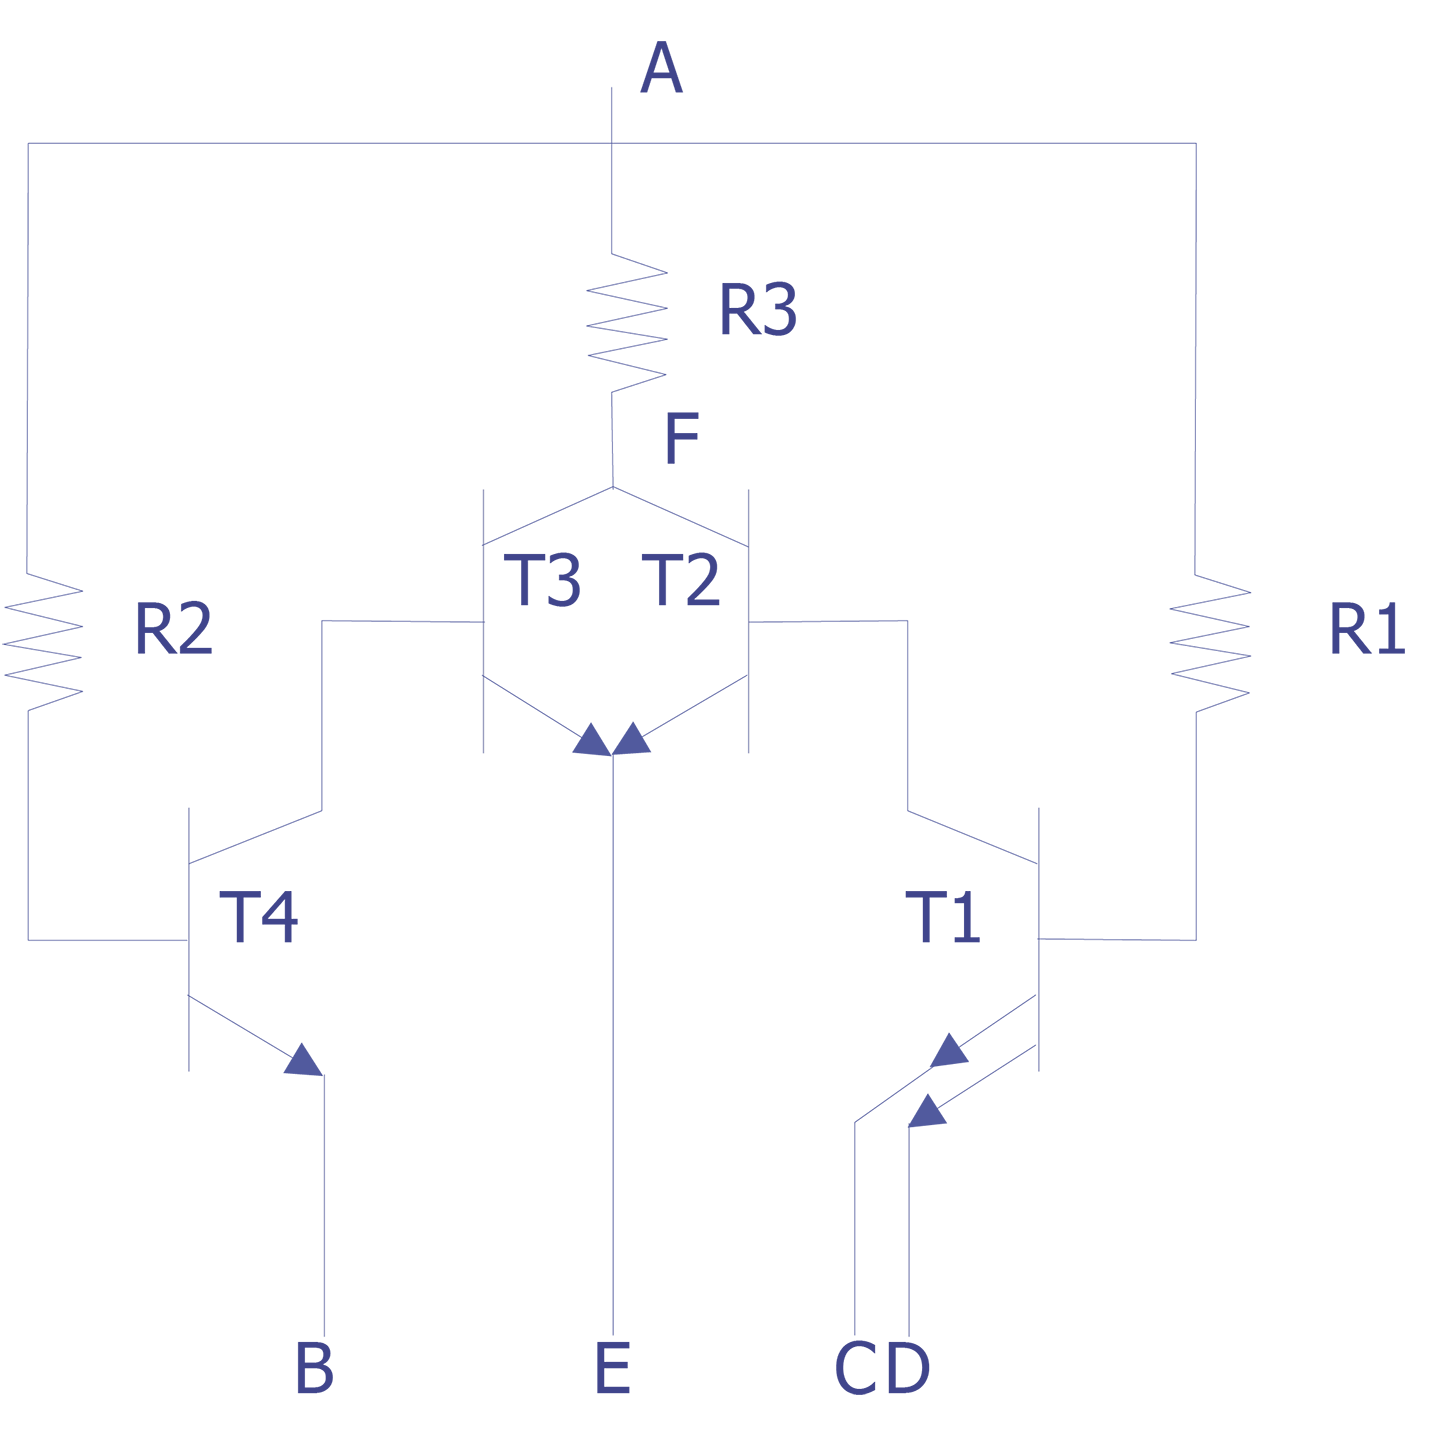 Circuit schematic for Figure 6 (after Glaser and Subak-Sharpe).